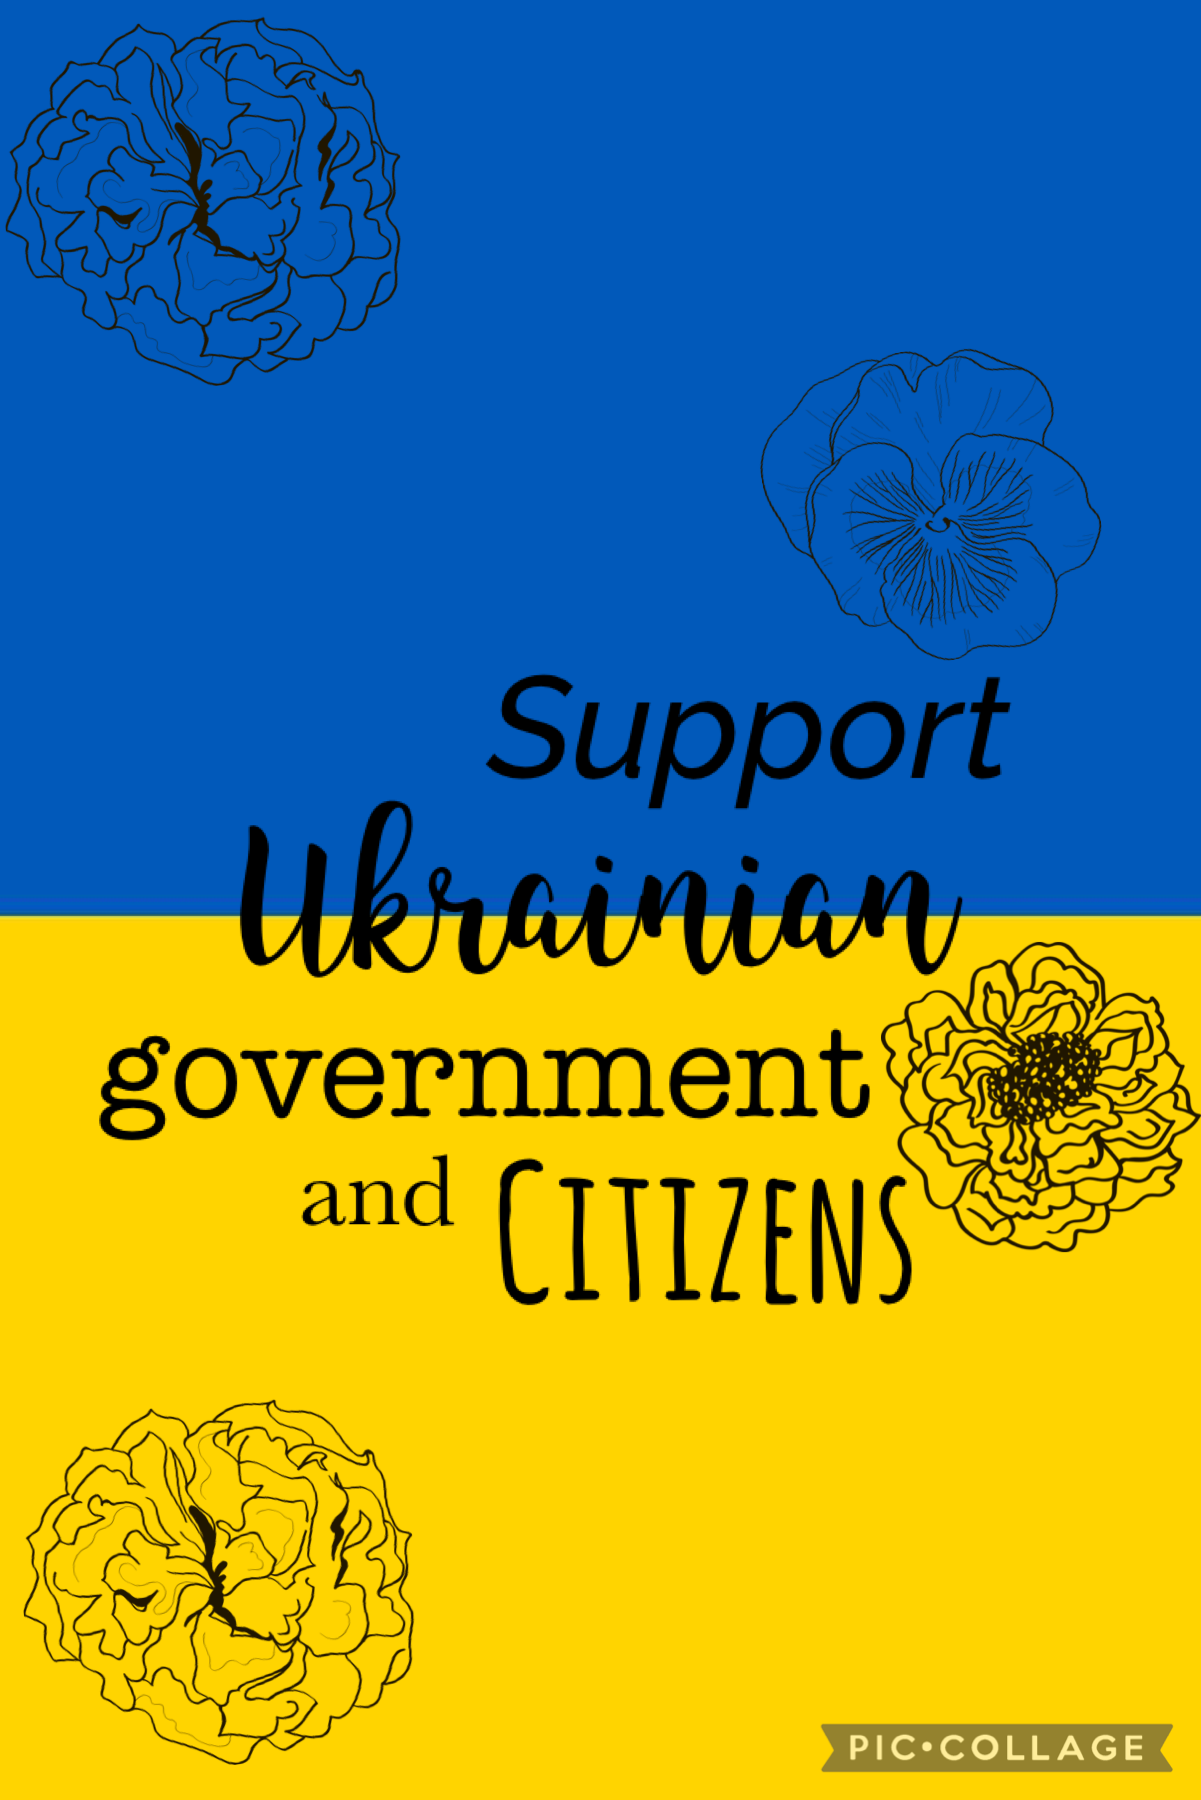 During this time of conflict and fear, I just wanted to post this to say.. I support Ukrainian people ❤️❤️ We stand with you in this time of fear, and hope for your safety and well-being ❤️ if you post anything similar to this please say so in the comment